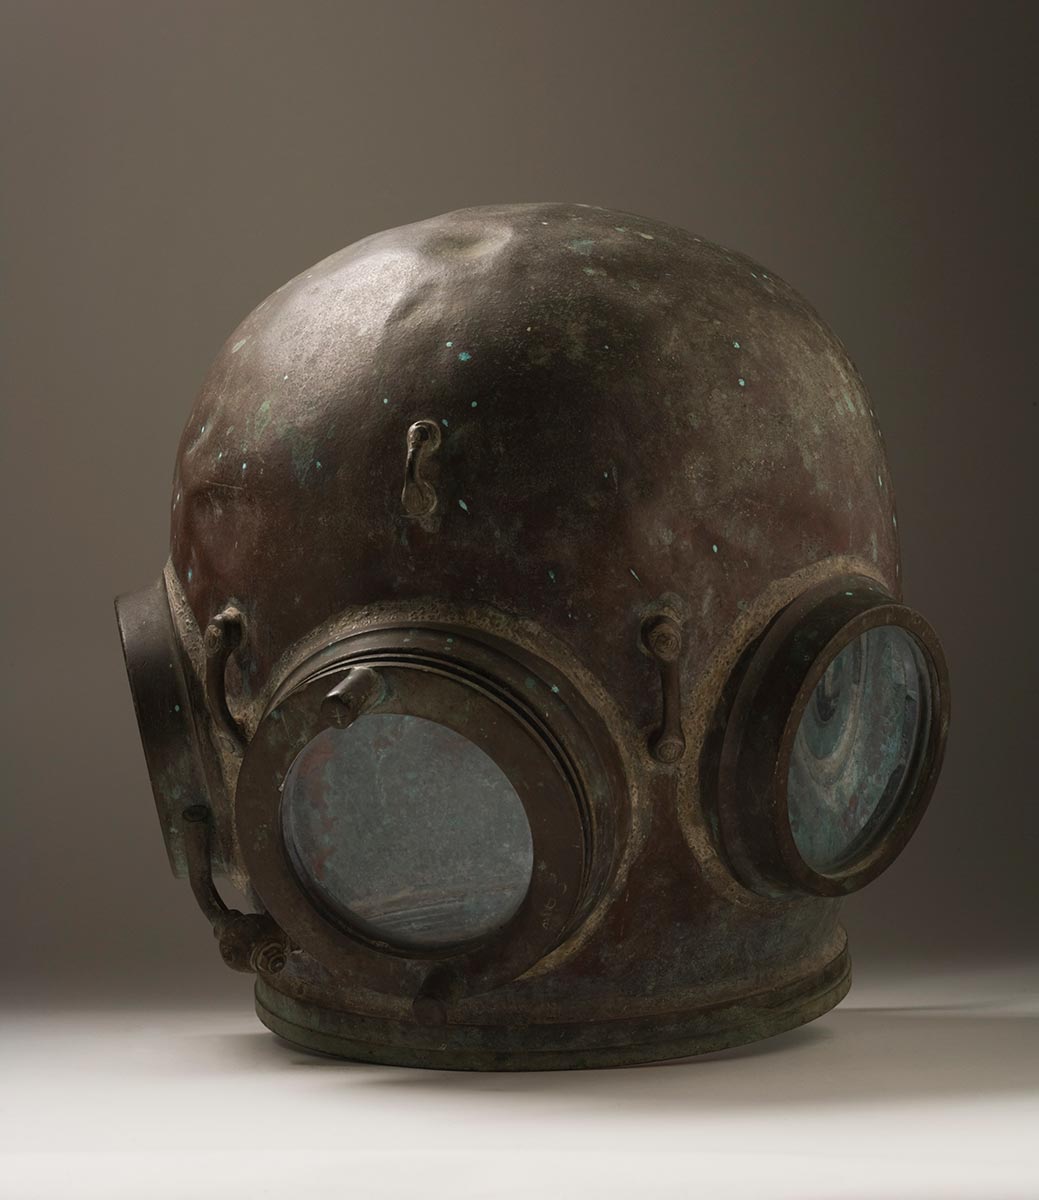 Metal diving helmet featuring a round head shape with round glass windows on three sides.The front window has two straight handles attached to it and there are metal loops welded in various places.